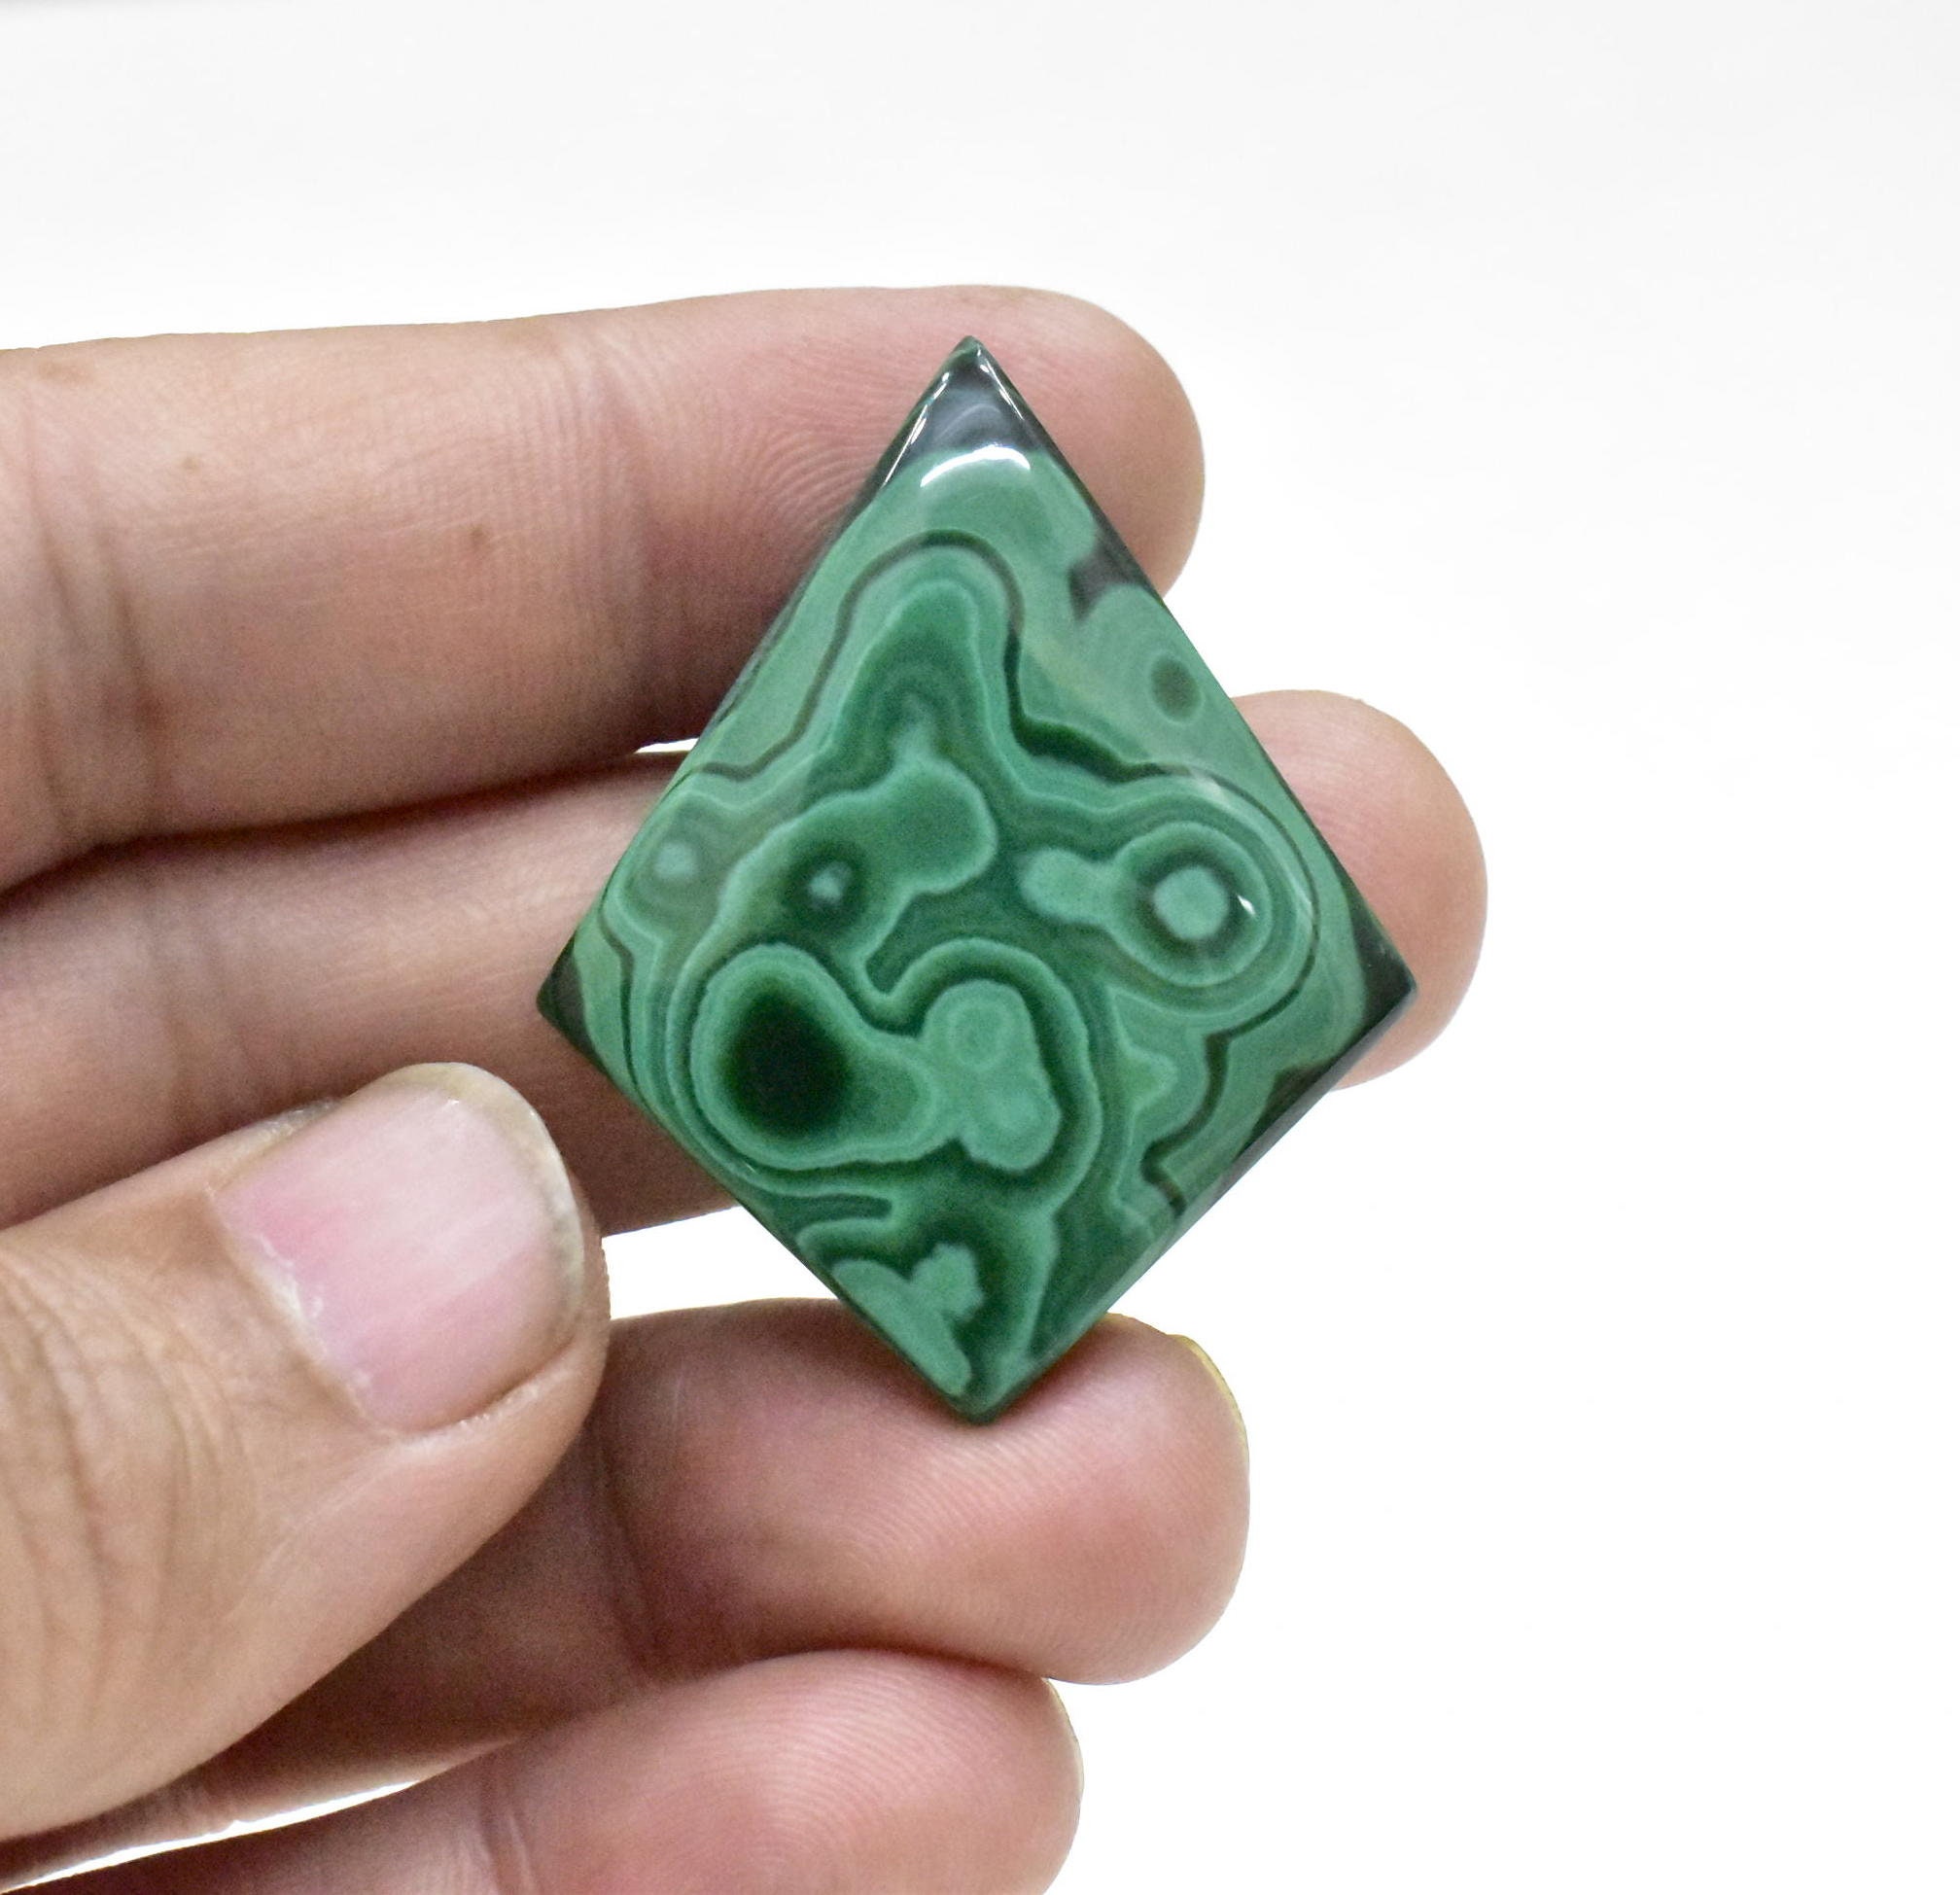 Natural Malachite Gemstone,Gemstone Cabochon,New Year Gift,Christmas Gift,Gift For Her,Mother’s Day Gift,Making For Jewellery,Gemstone Cab. | Save 33% - Rajasthan Living 10